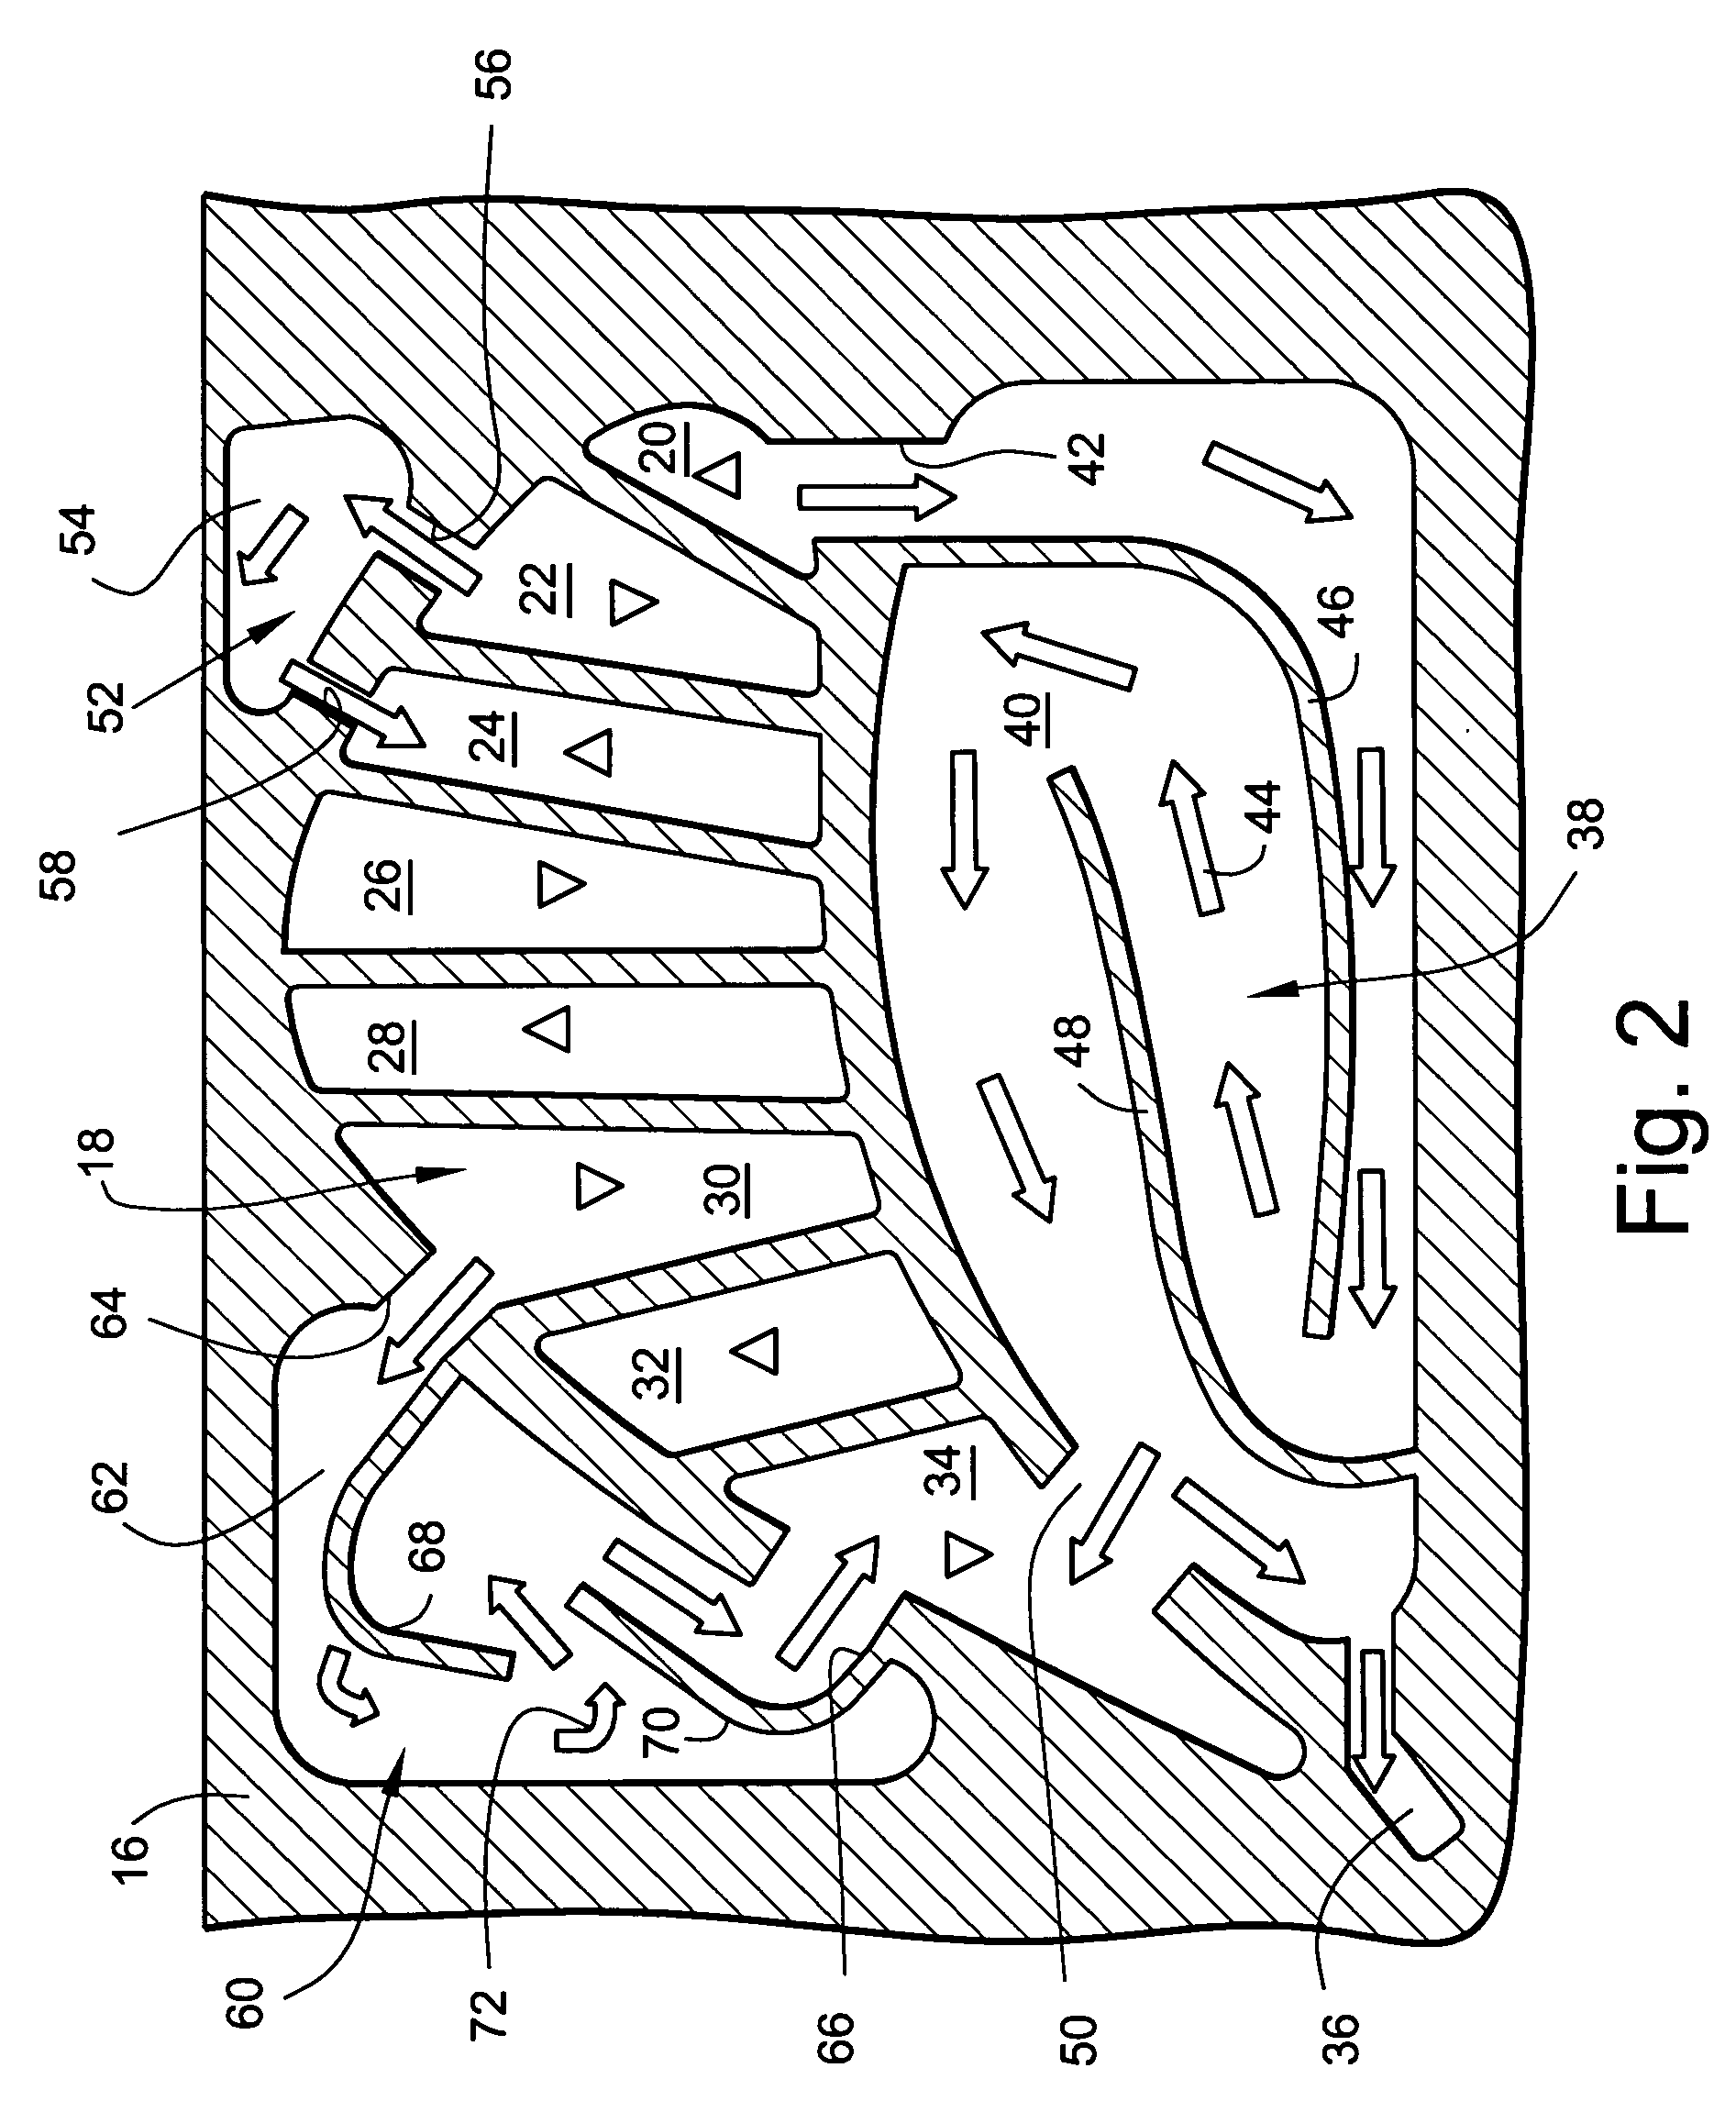 Apparatus and methods for cooling turbine bucket platforms